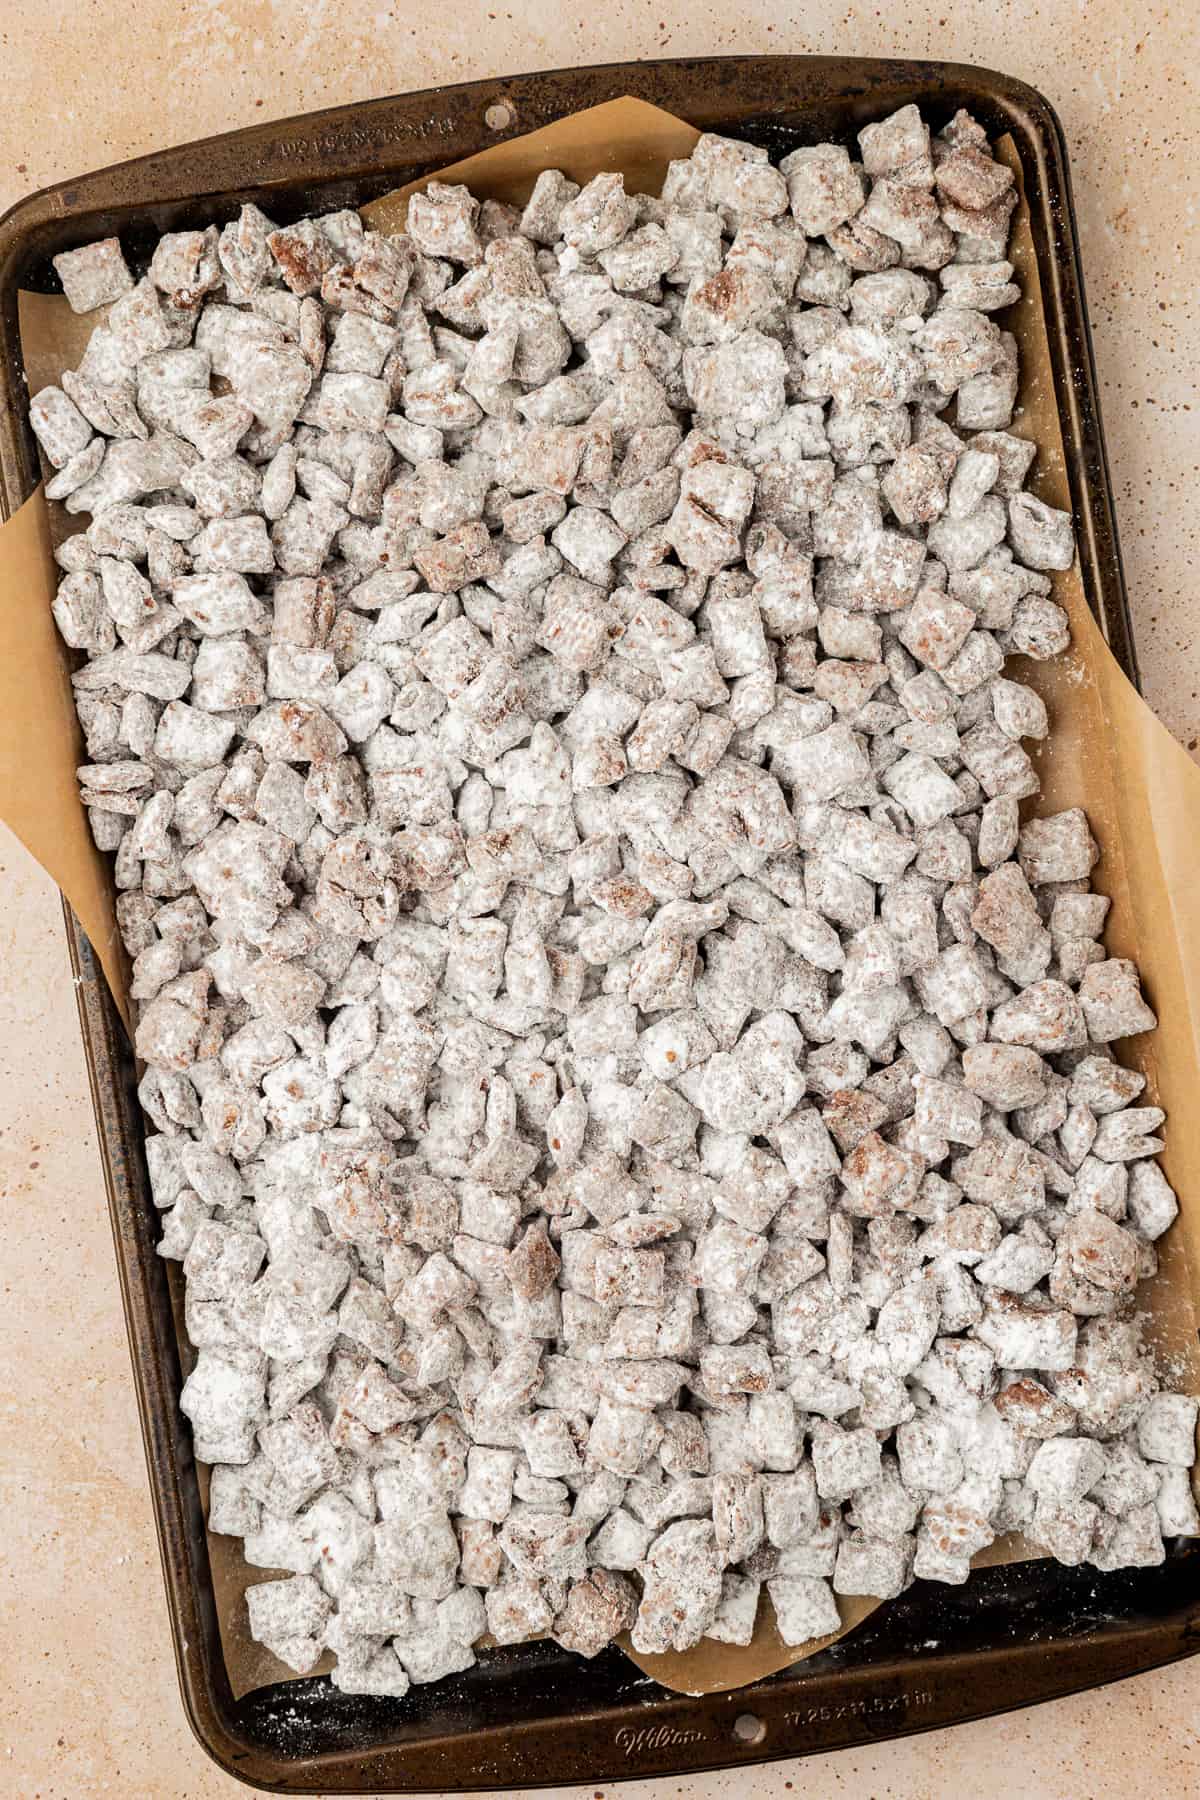 a sheet pan lined with parchment paper full of puppy chow/muddy buddies